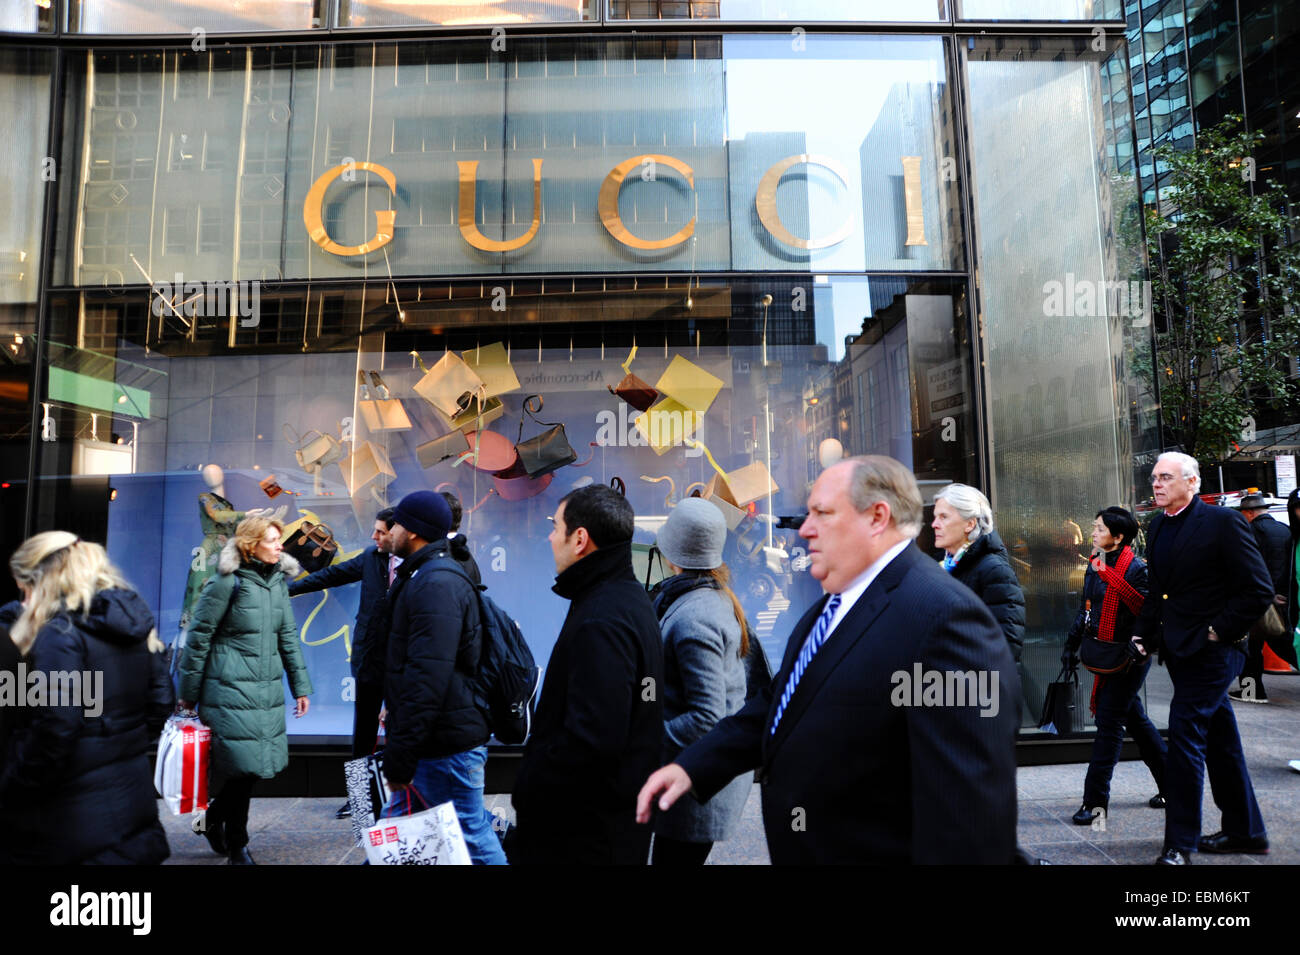 Manhattan New York USA November 2014 - Famous Gucci store on Fifth Stock Photo: 76046988 - Alamy